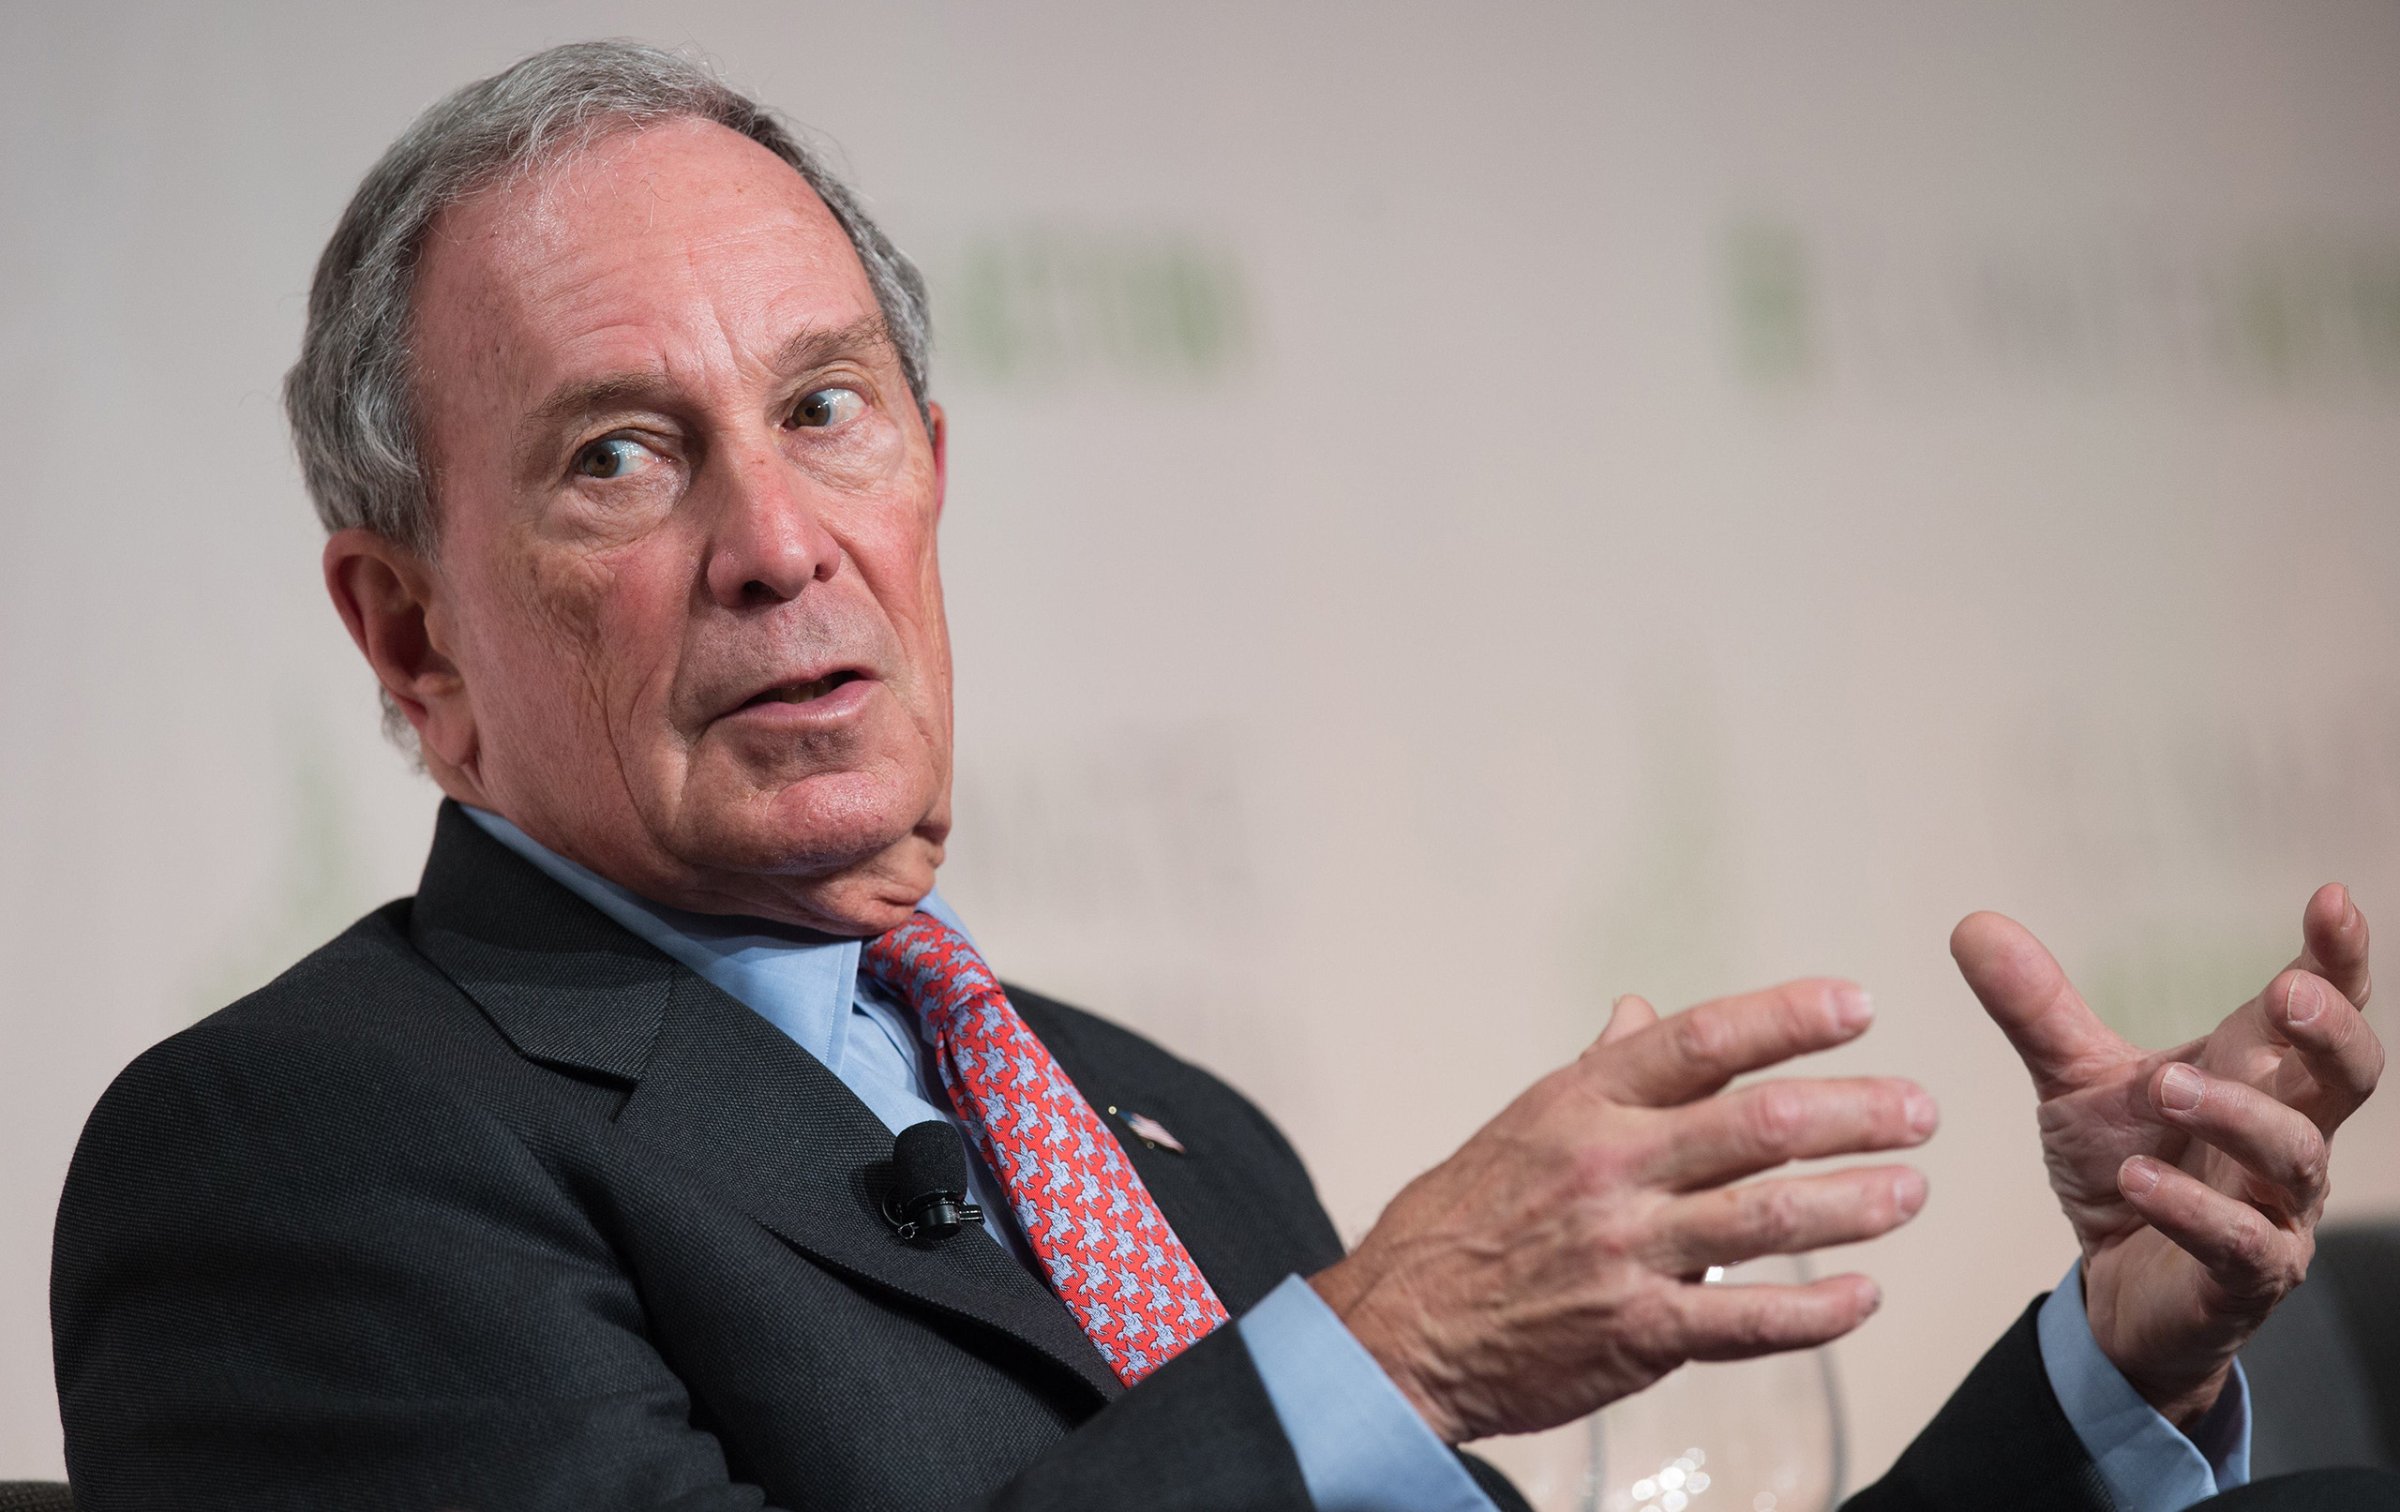 Michael Bloomberg participates in a discussion at the Climate Action 2016 conference in Washington, DC, on May 5, 2016.